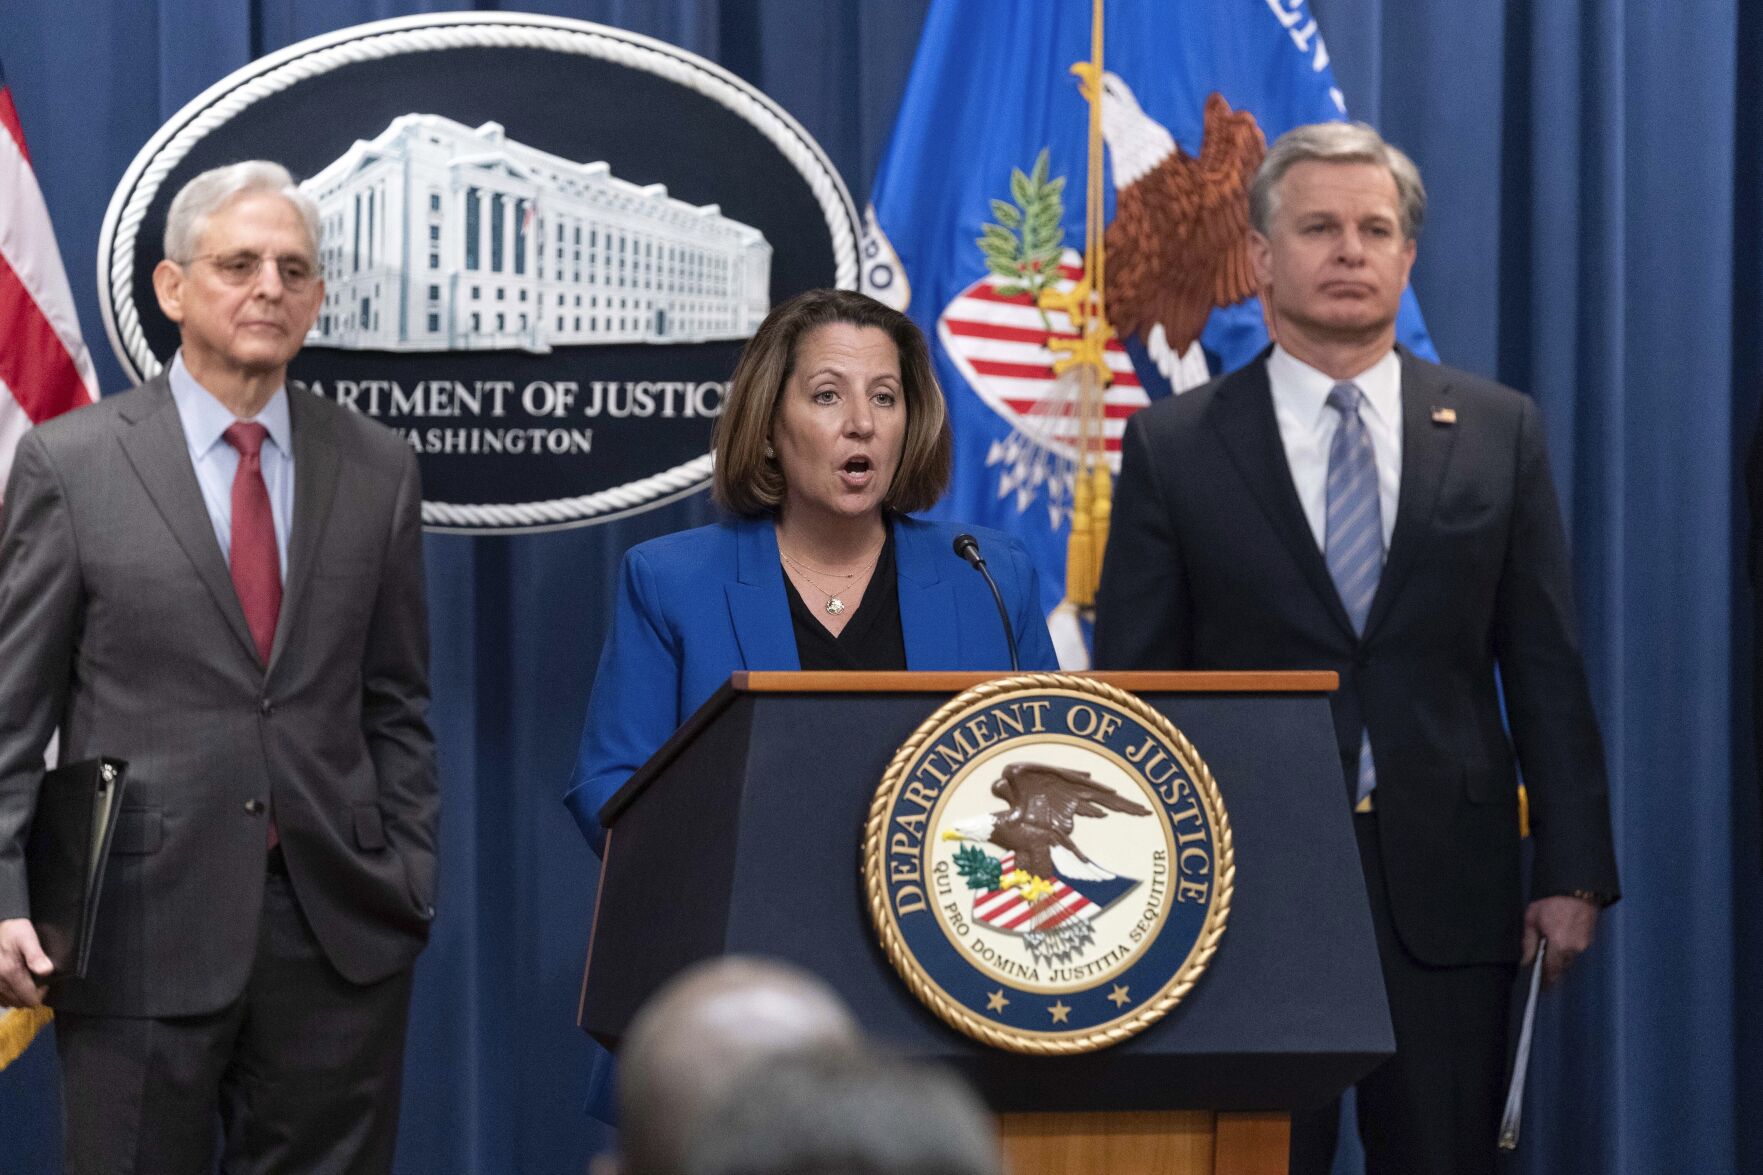 <p>Deputy Attorney General Lisa Monaco flanked by Attorney General Merrick Garland, left, and Federal Bureau of Investigation (FBI) Director Christopher Wray speaks during a news conference to announce an international ransomware enforcement action, at the Department of Justice in Washington, Thursday, Jan. 26, 2023. The FBI has seized the website of a prolific ransomware gang that has heavily targeted hospitals and other healthcare providers. (AP Photo/Jose Luis Magana)</p>   PHOTO CREDIT: Jose Luis Magana - freelancer, FR159526 AP